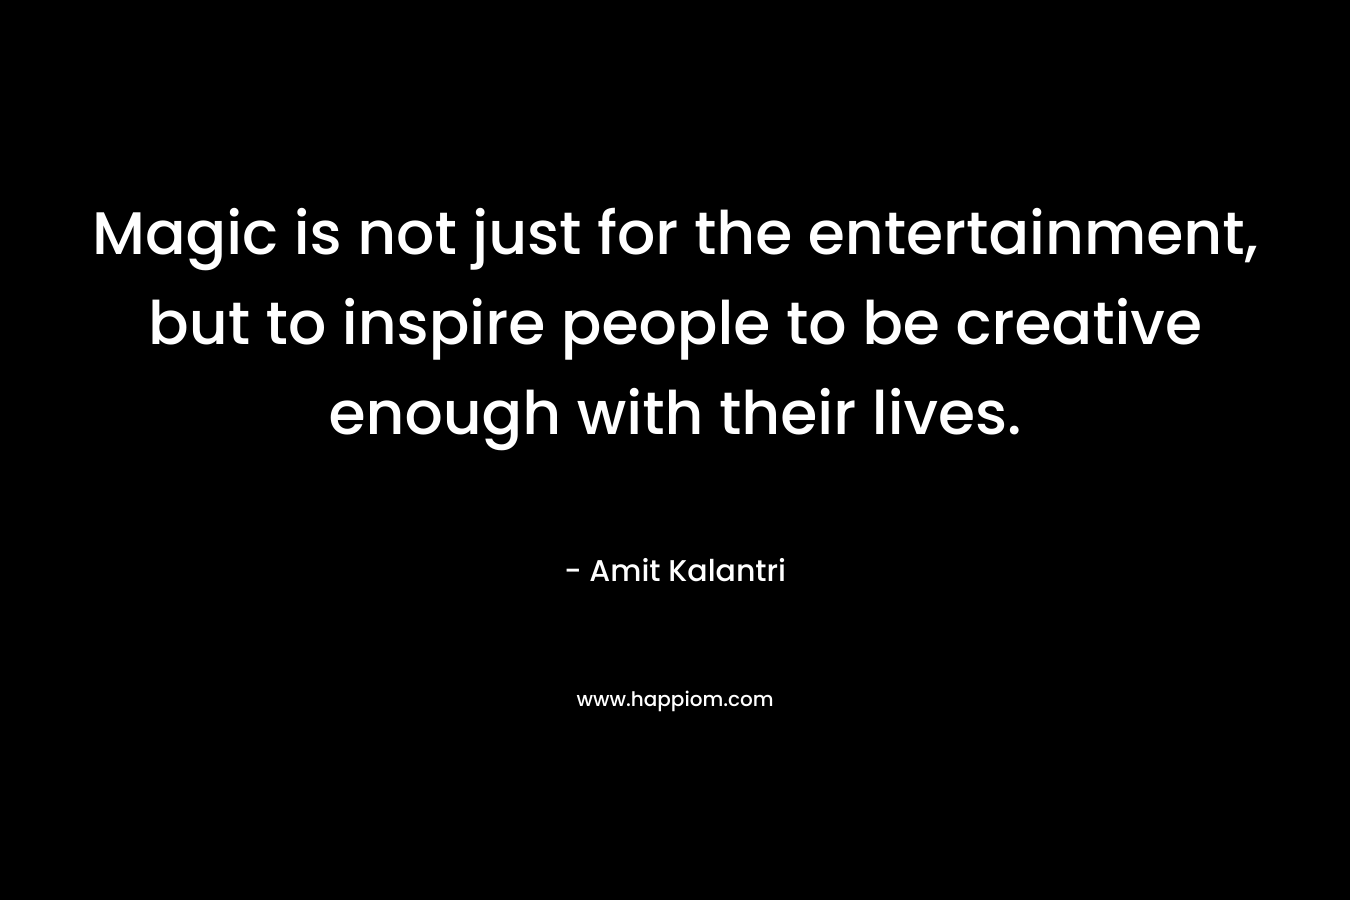 Magic is not just for the entertainment, but to inspire people to be creative enough with their lives.